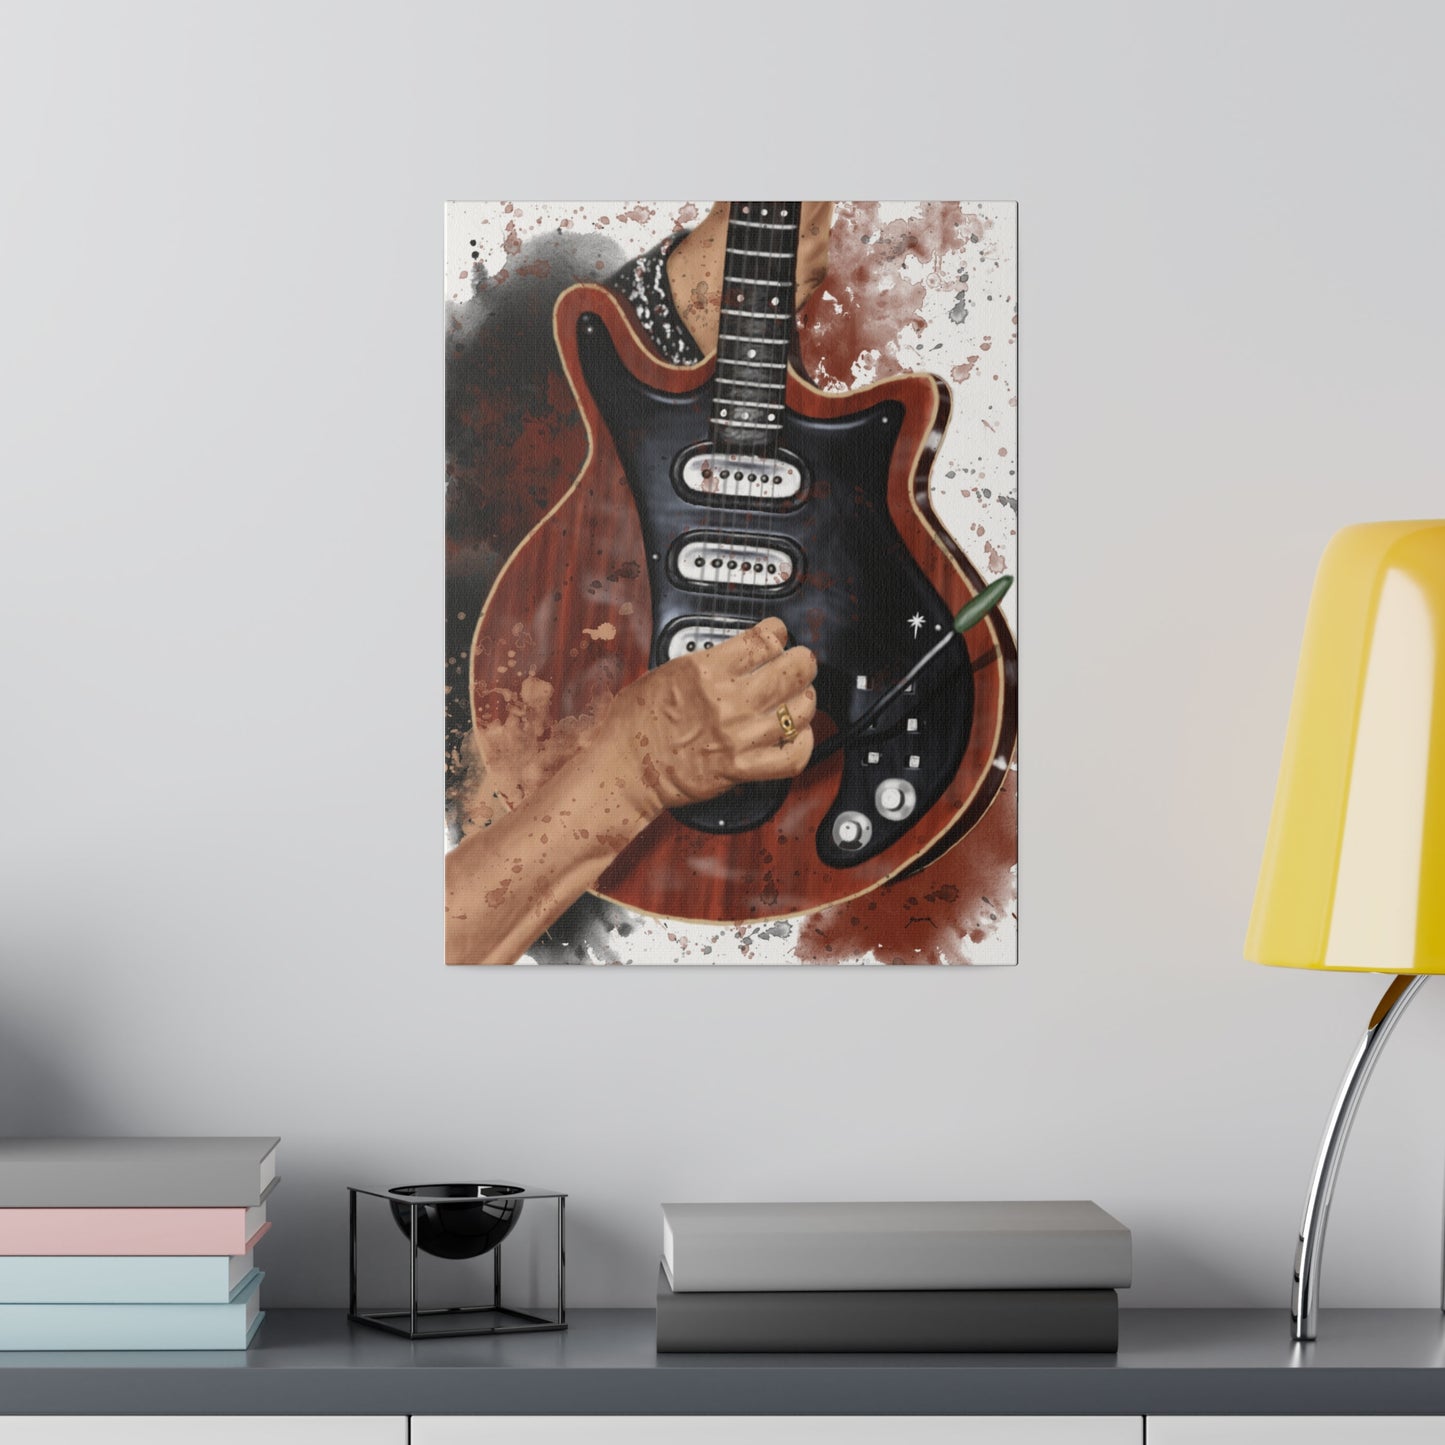 Digital painting of Brian's electric guitar printed on canvas